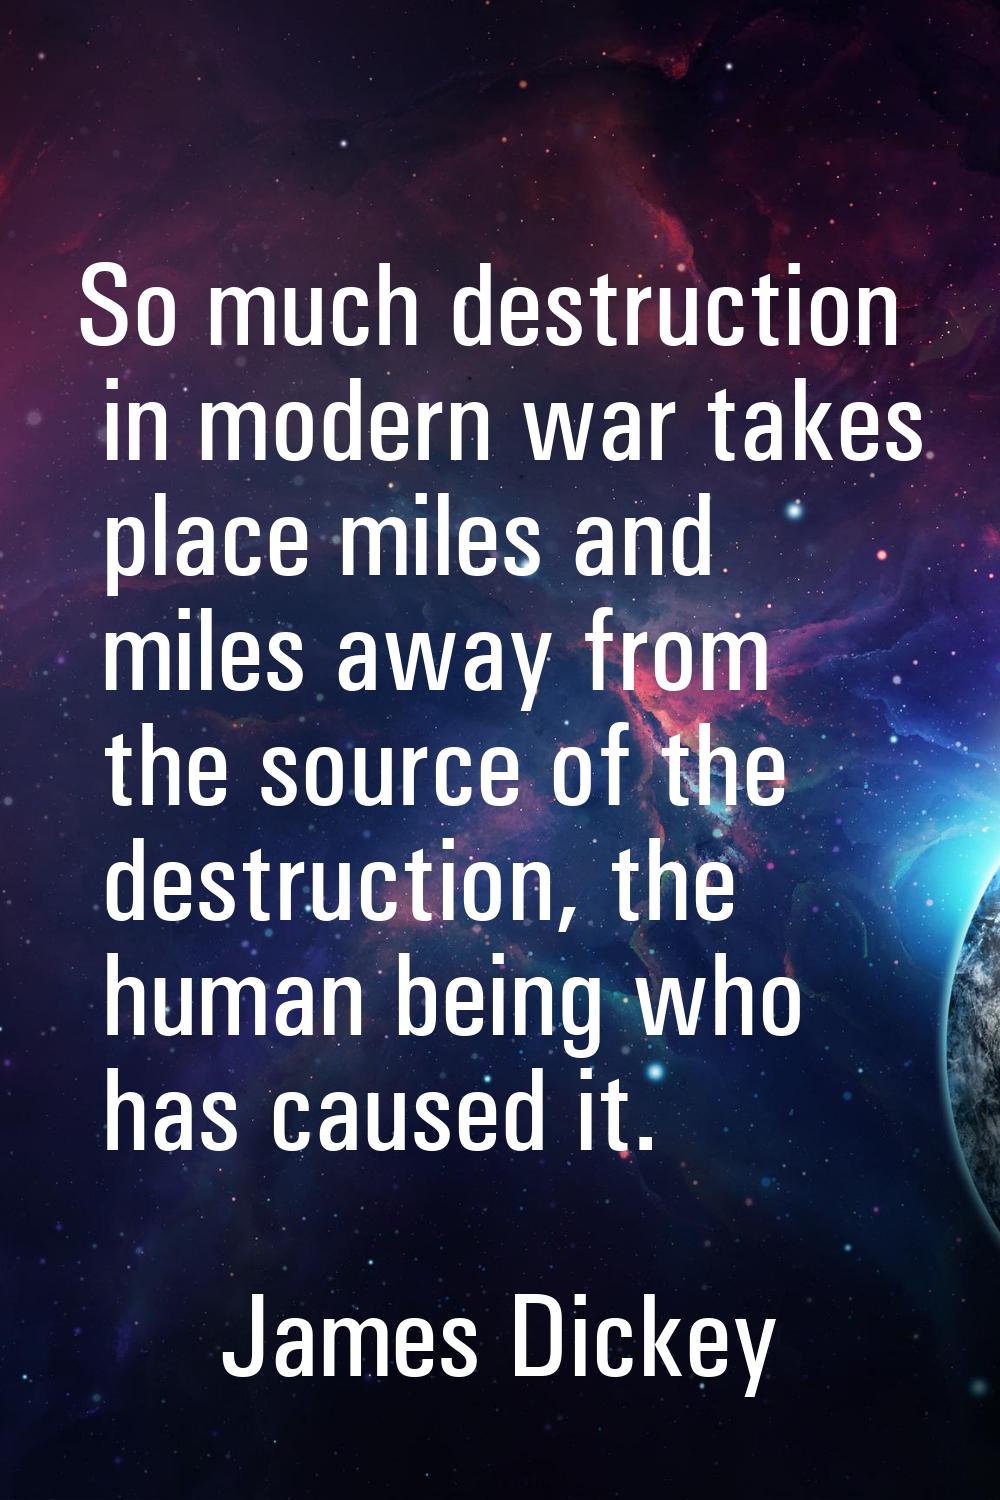 So much destruction in modern war takes place miles and miles away from the source of the destructi